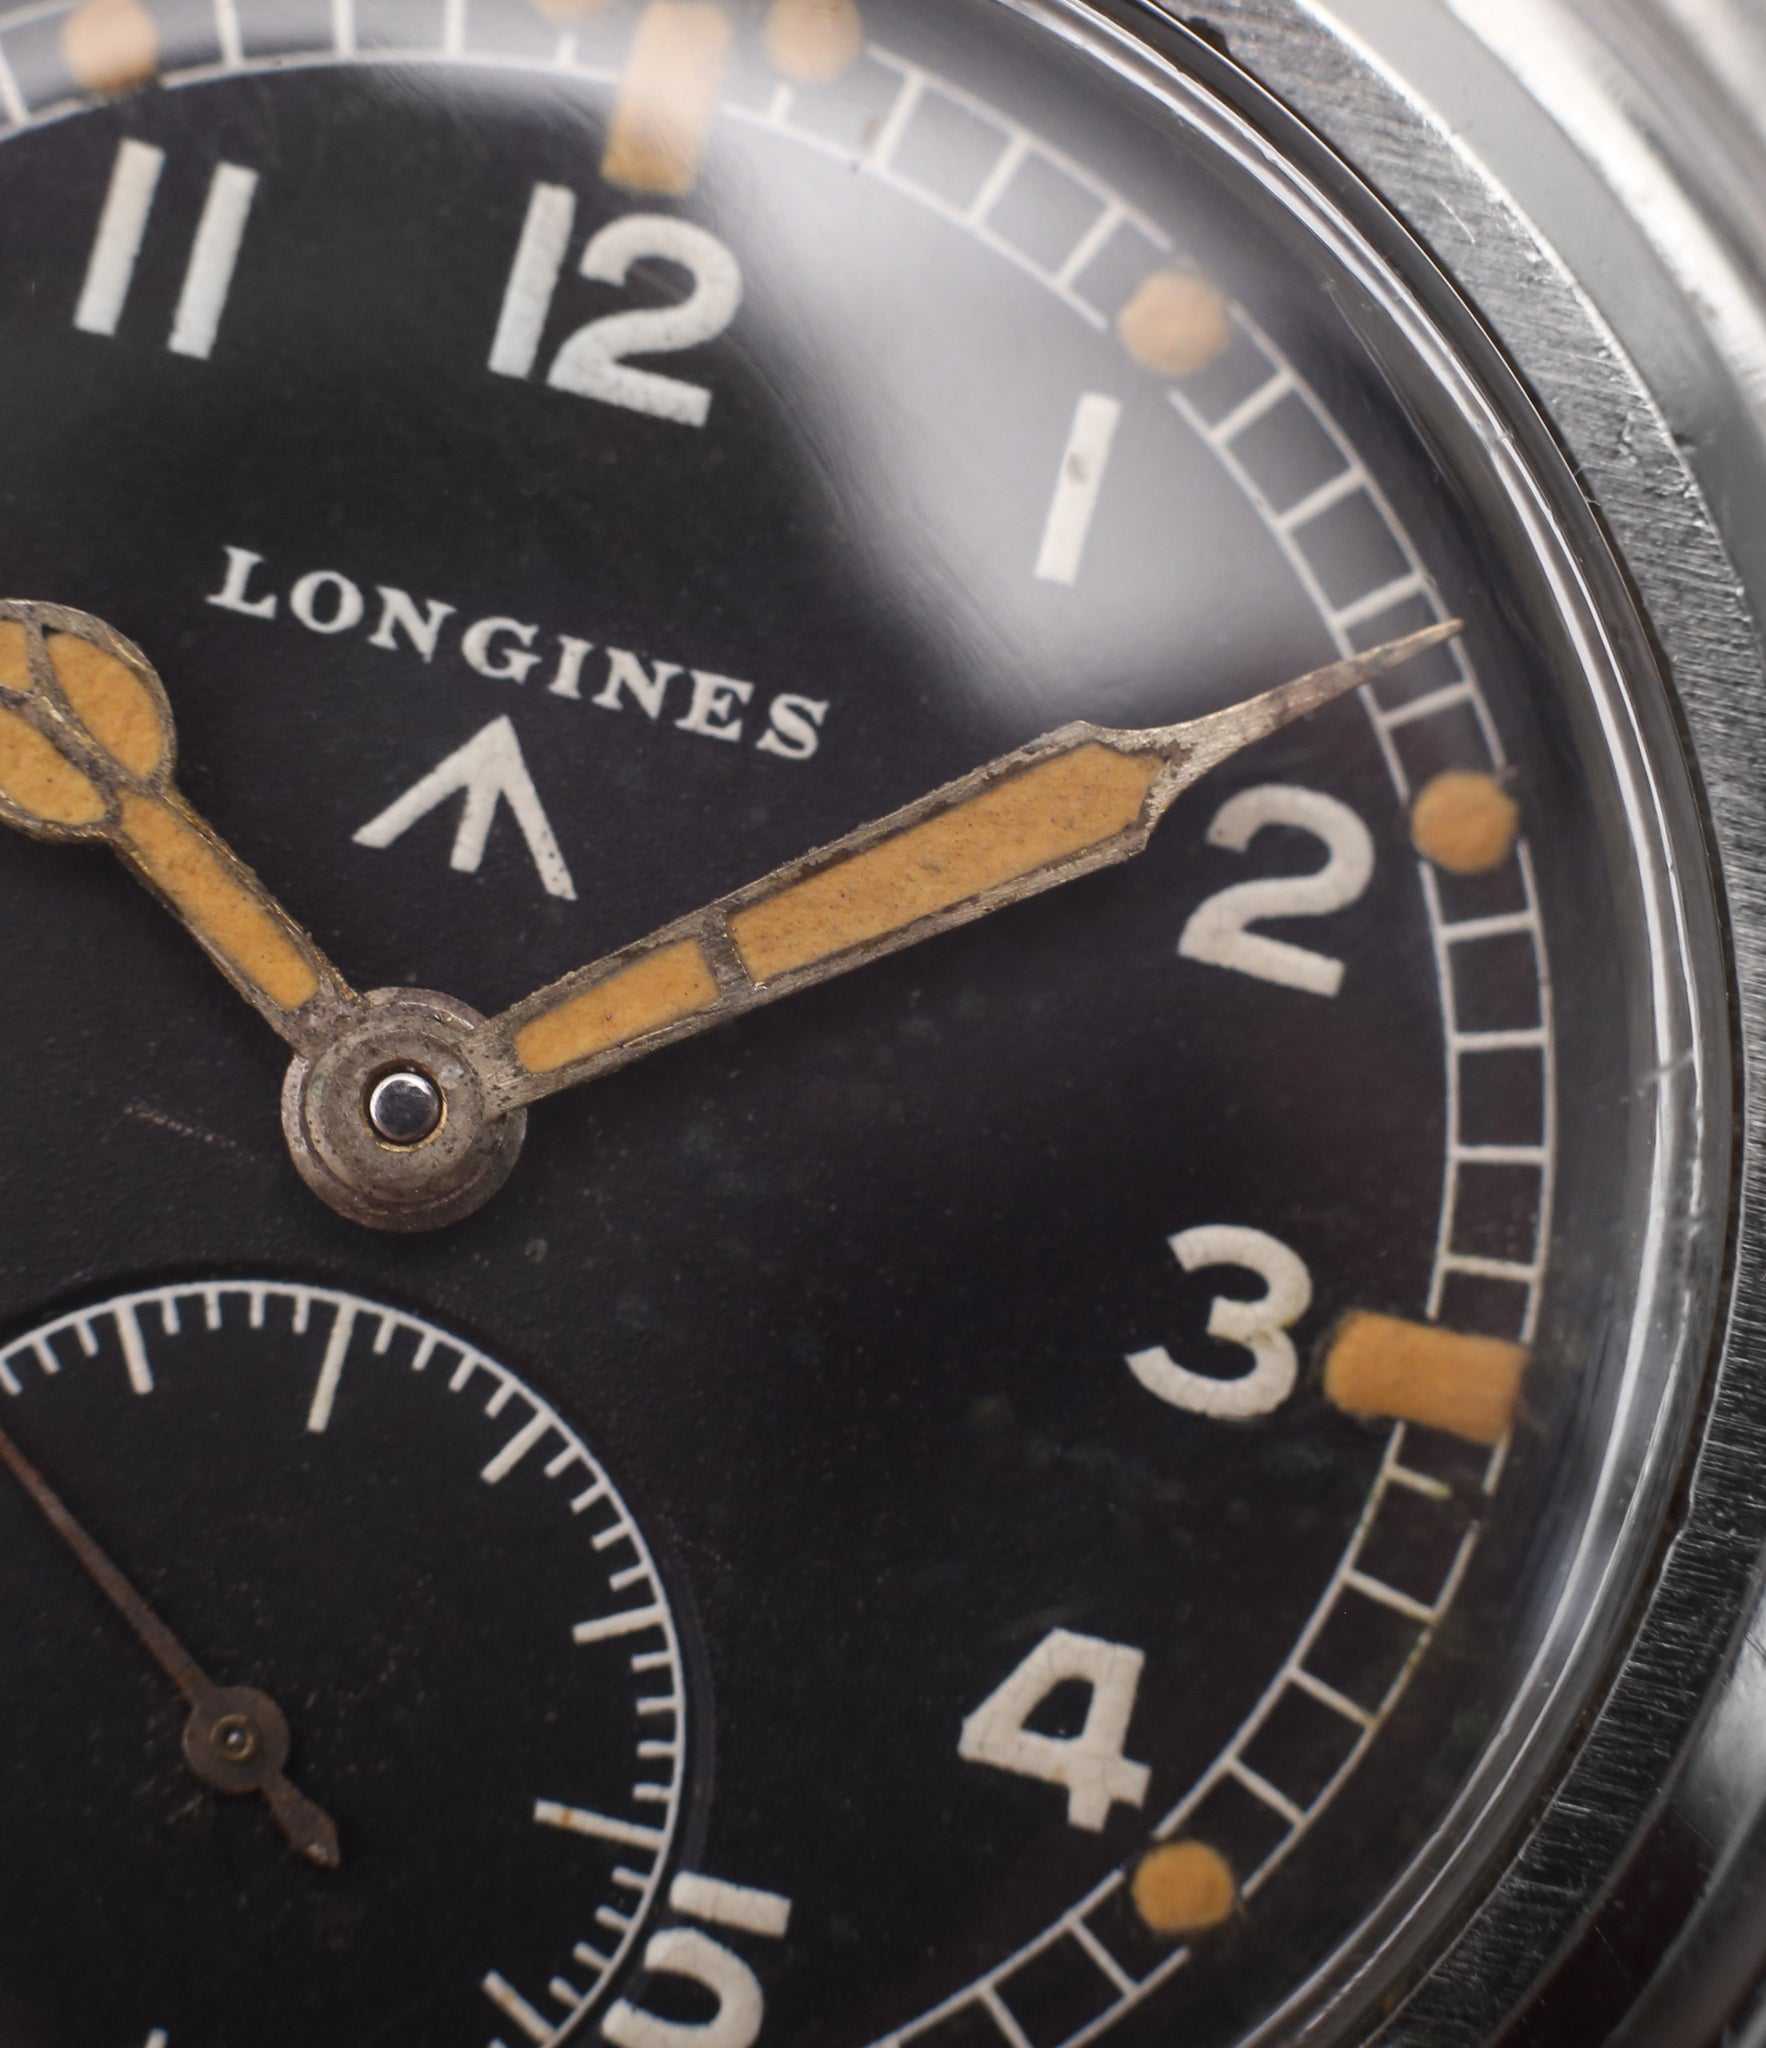 cathedral hands Longines WWW MoD British military vintage watch F6870 for sale online at A Collected Man London vintage watches specialist 